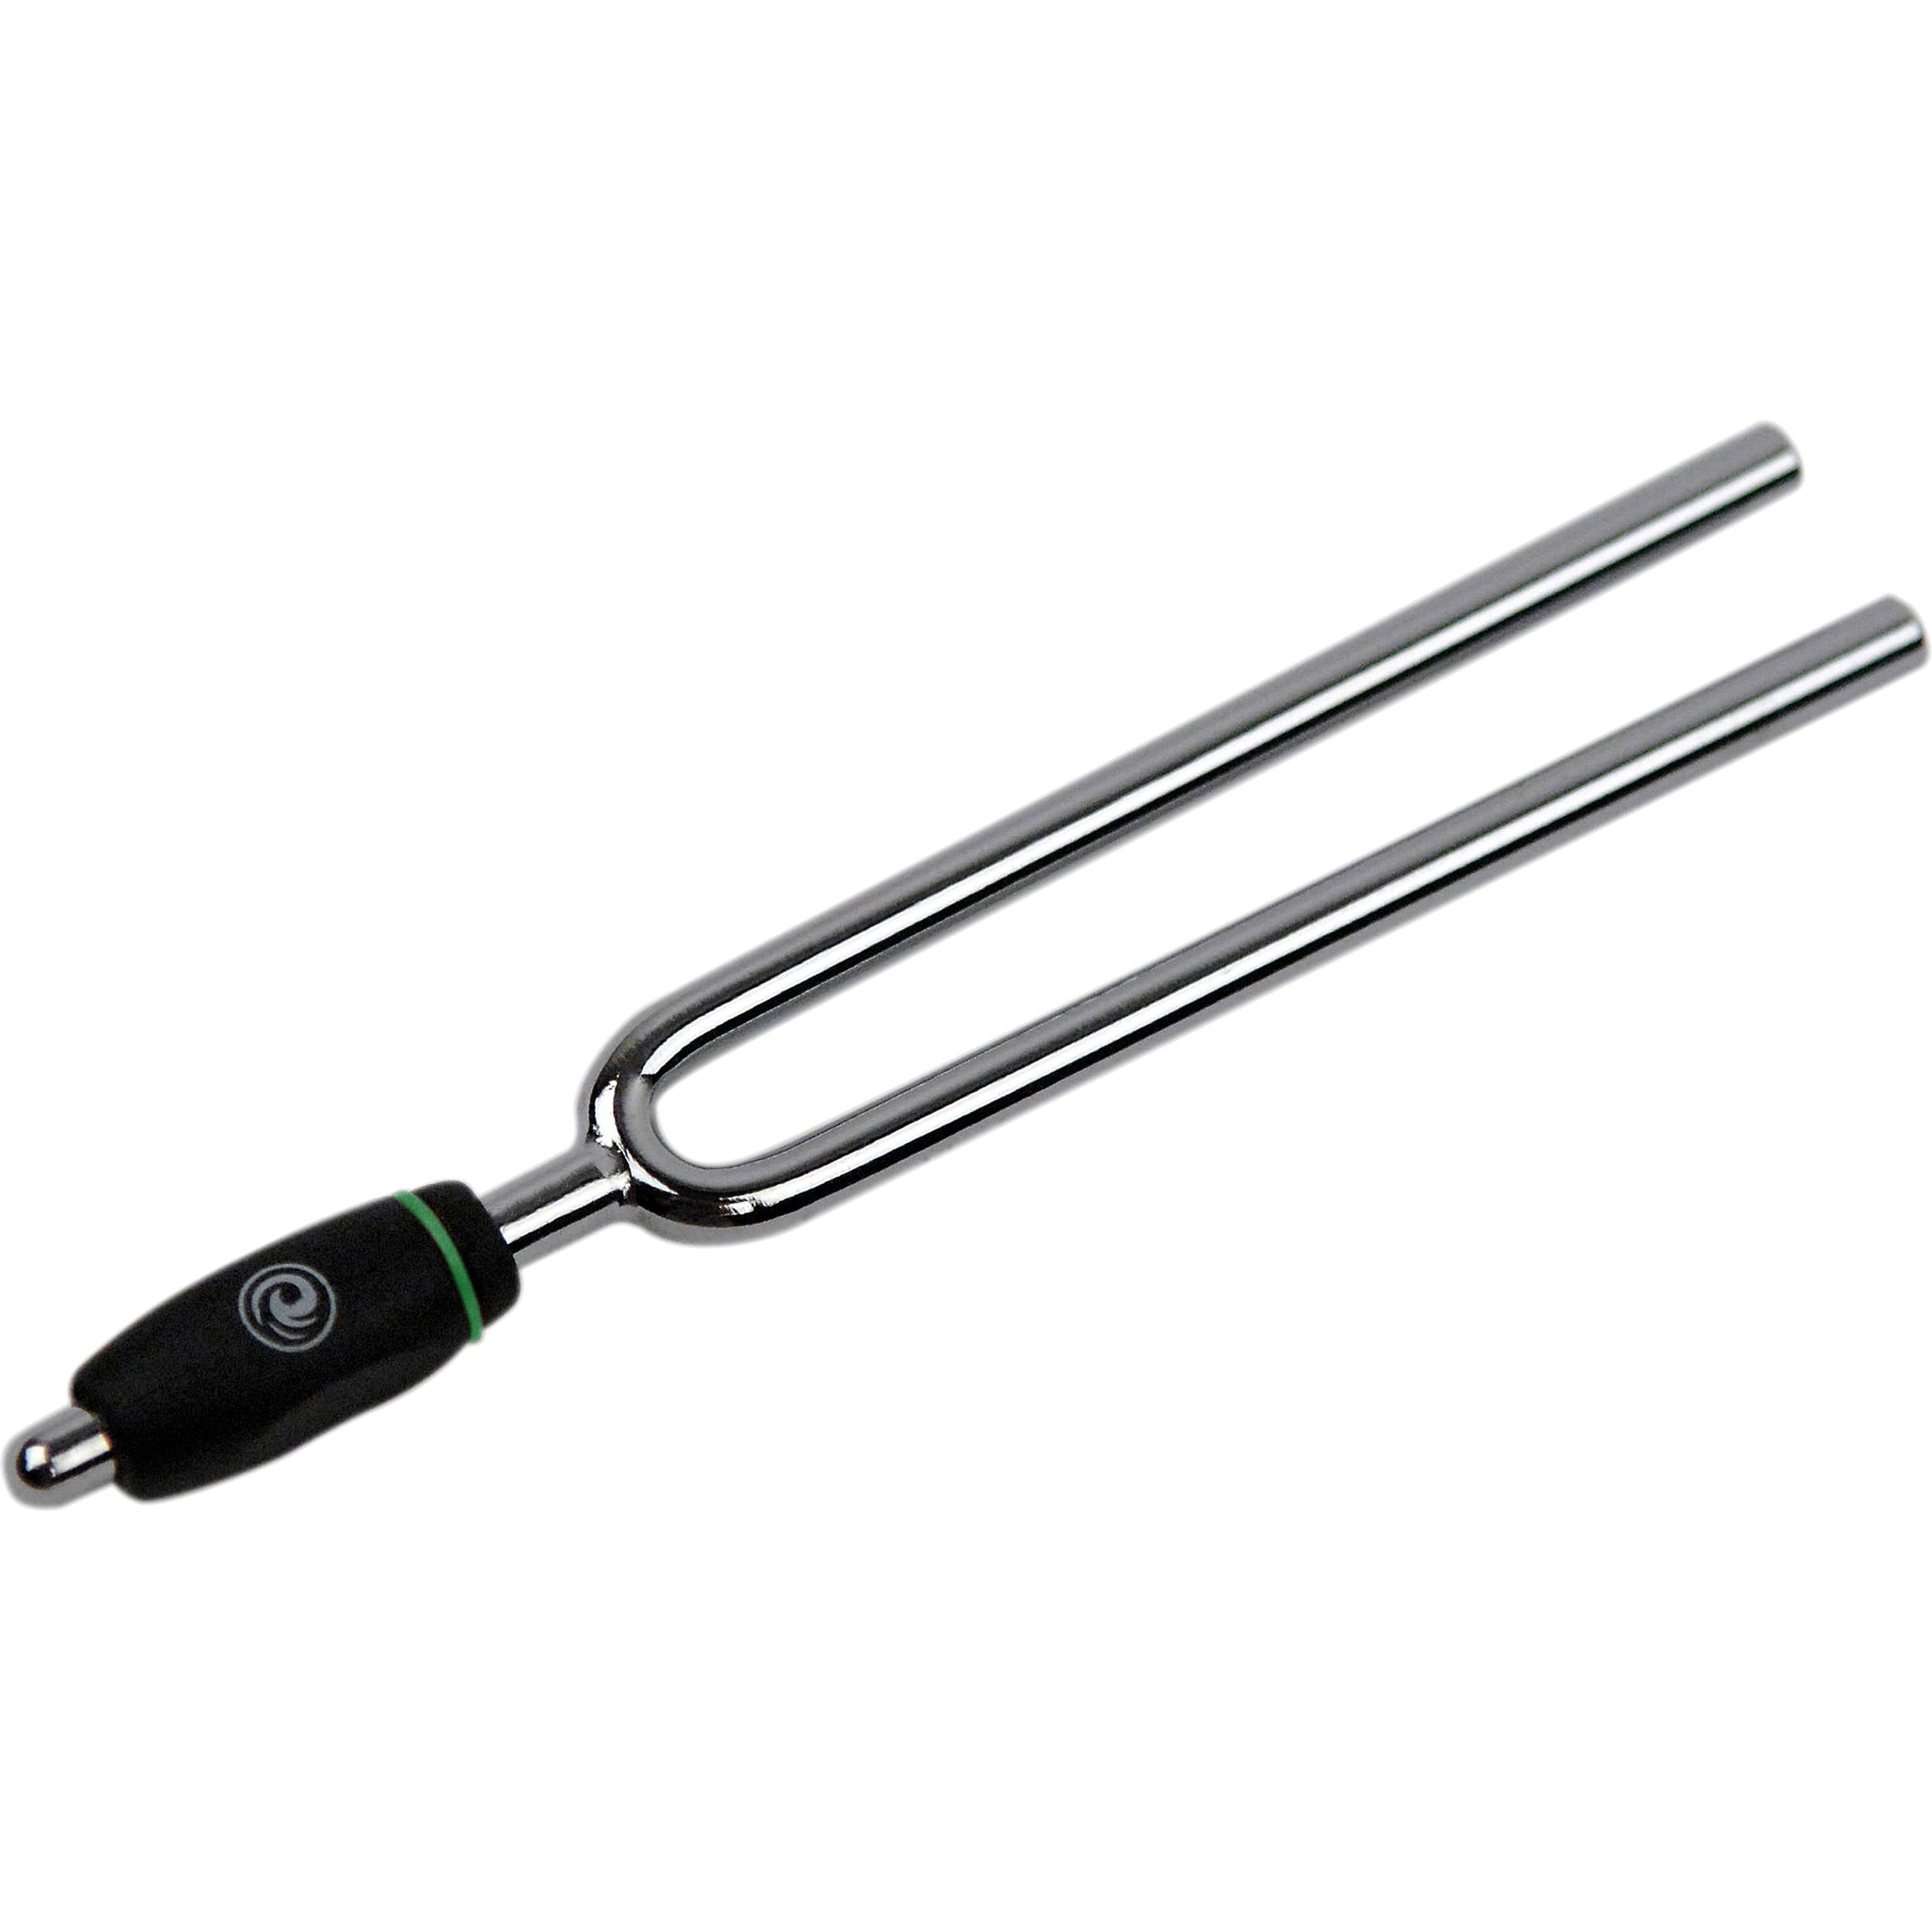 D'Addario Tuning Fork for Key of "E" (329.6Hz)